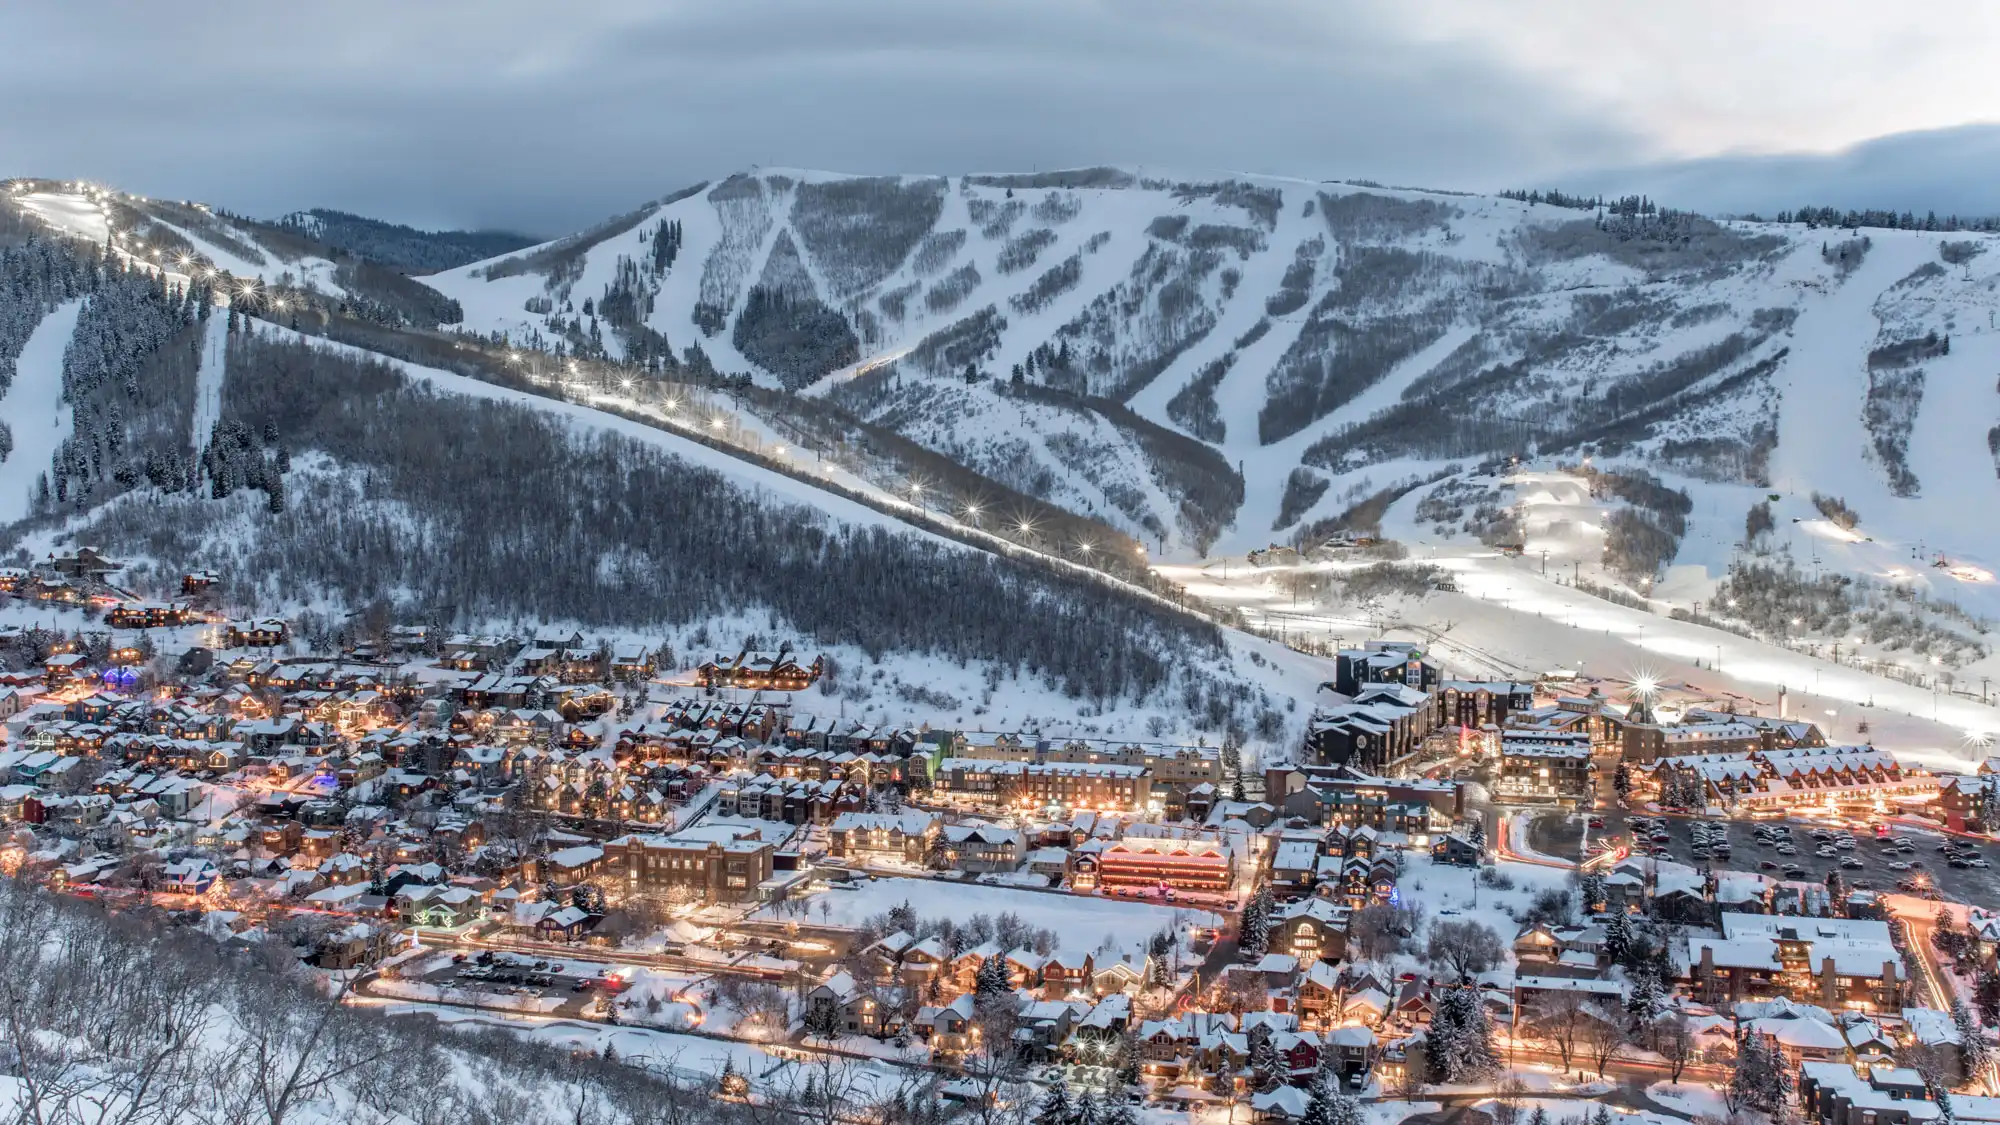 Dusk view of Park City, Utah, with snow-covered slopes and twinkling lights of the town below.